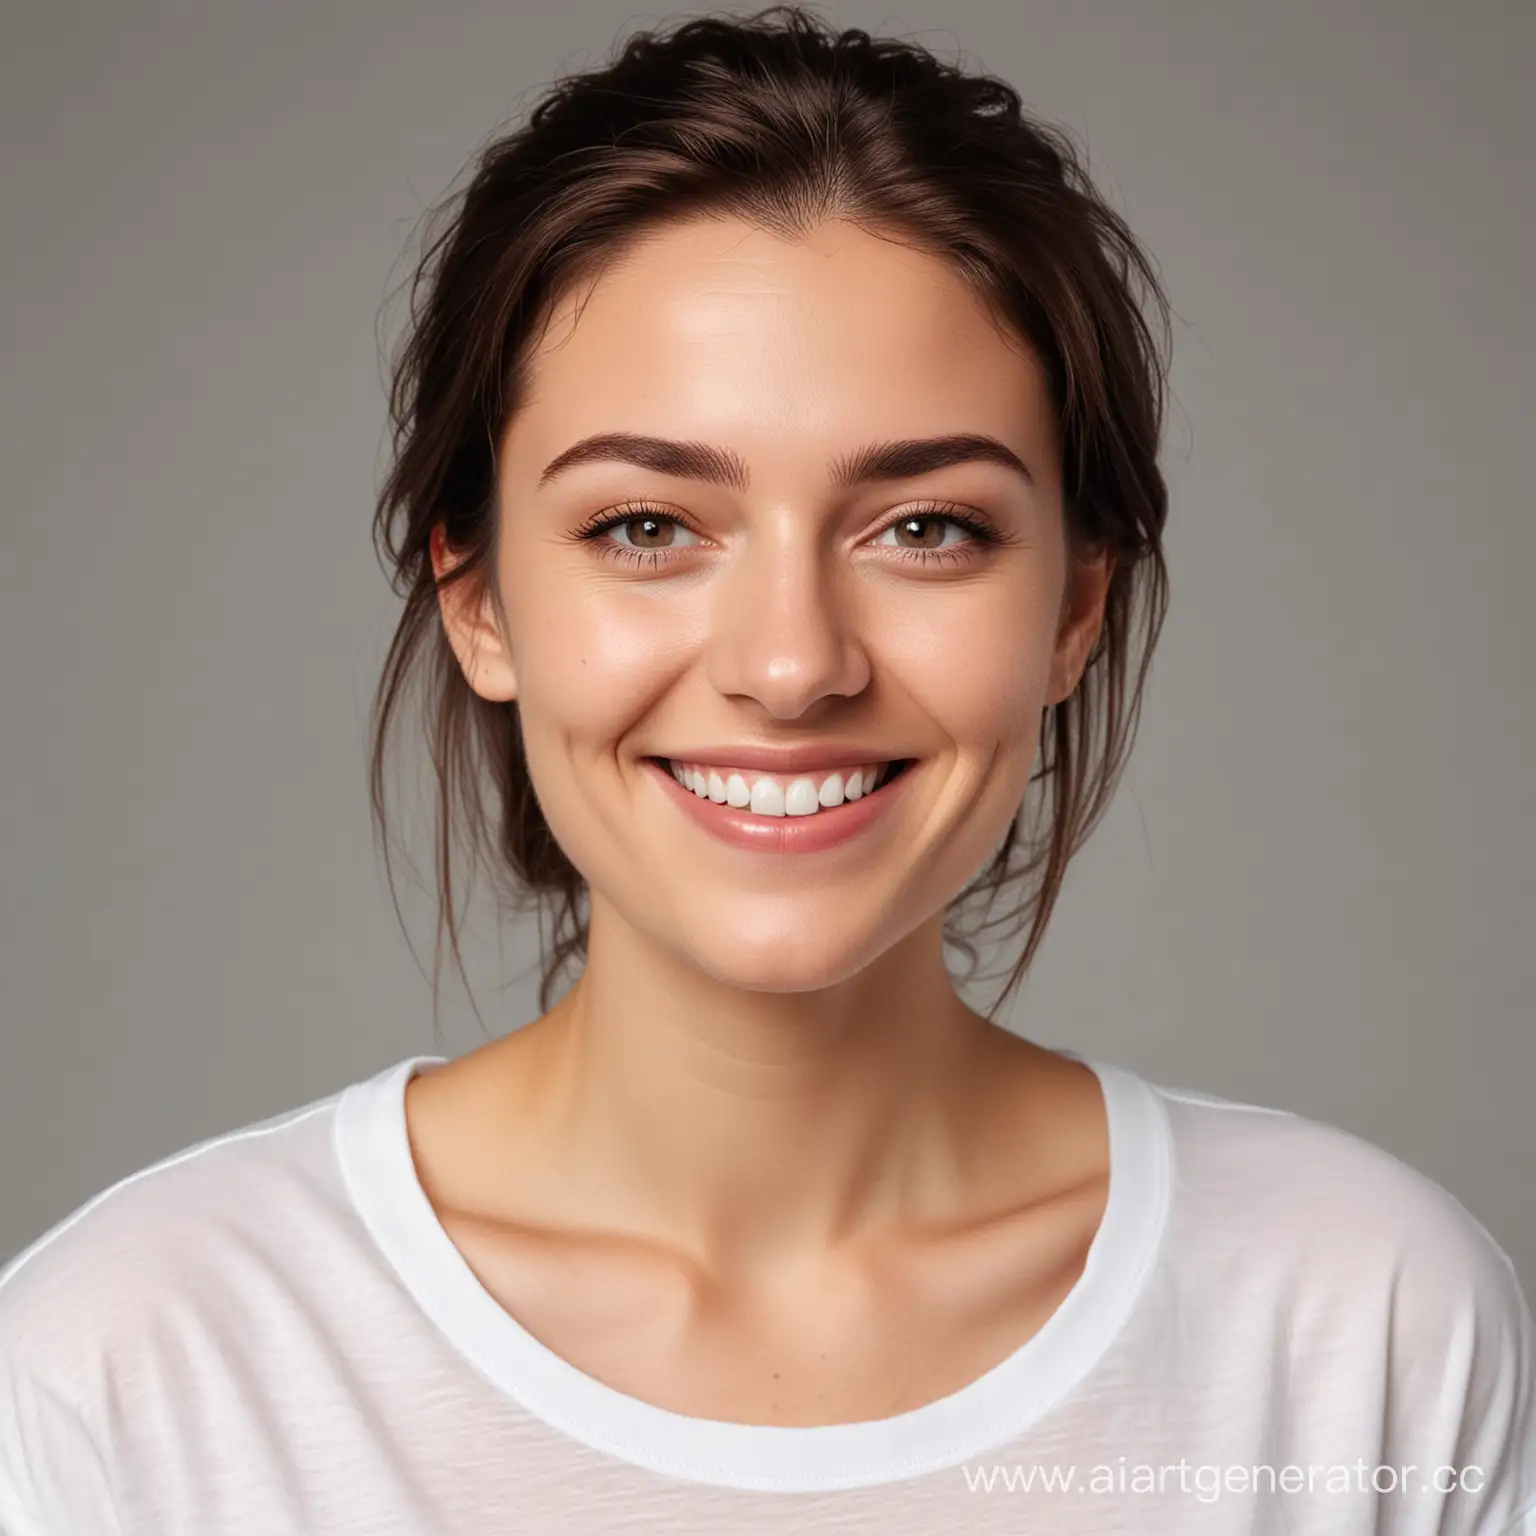 Smiling-28YearOld-Woman-in-White-TShirt-Natural-Beauty-Portrait